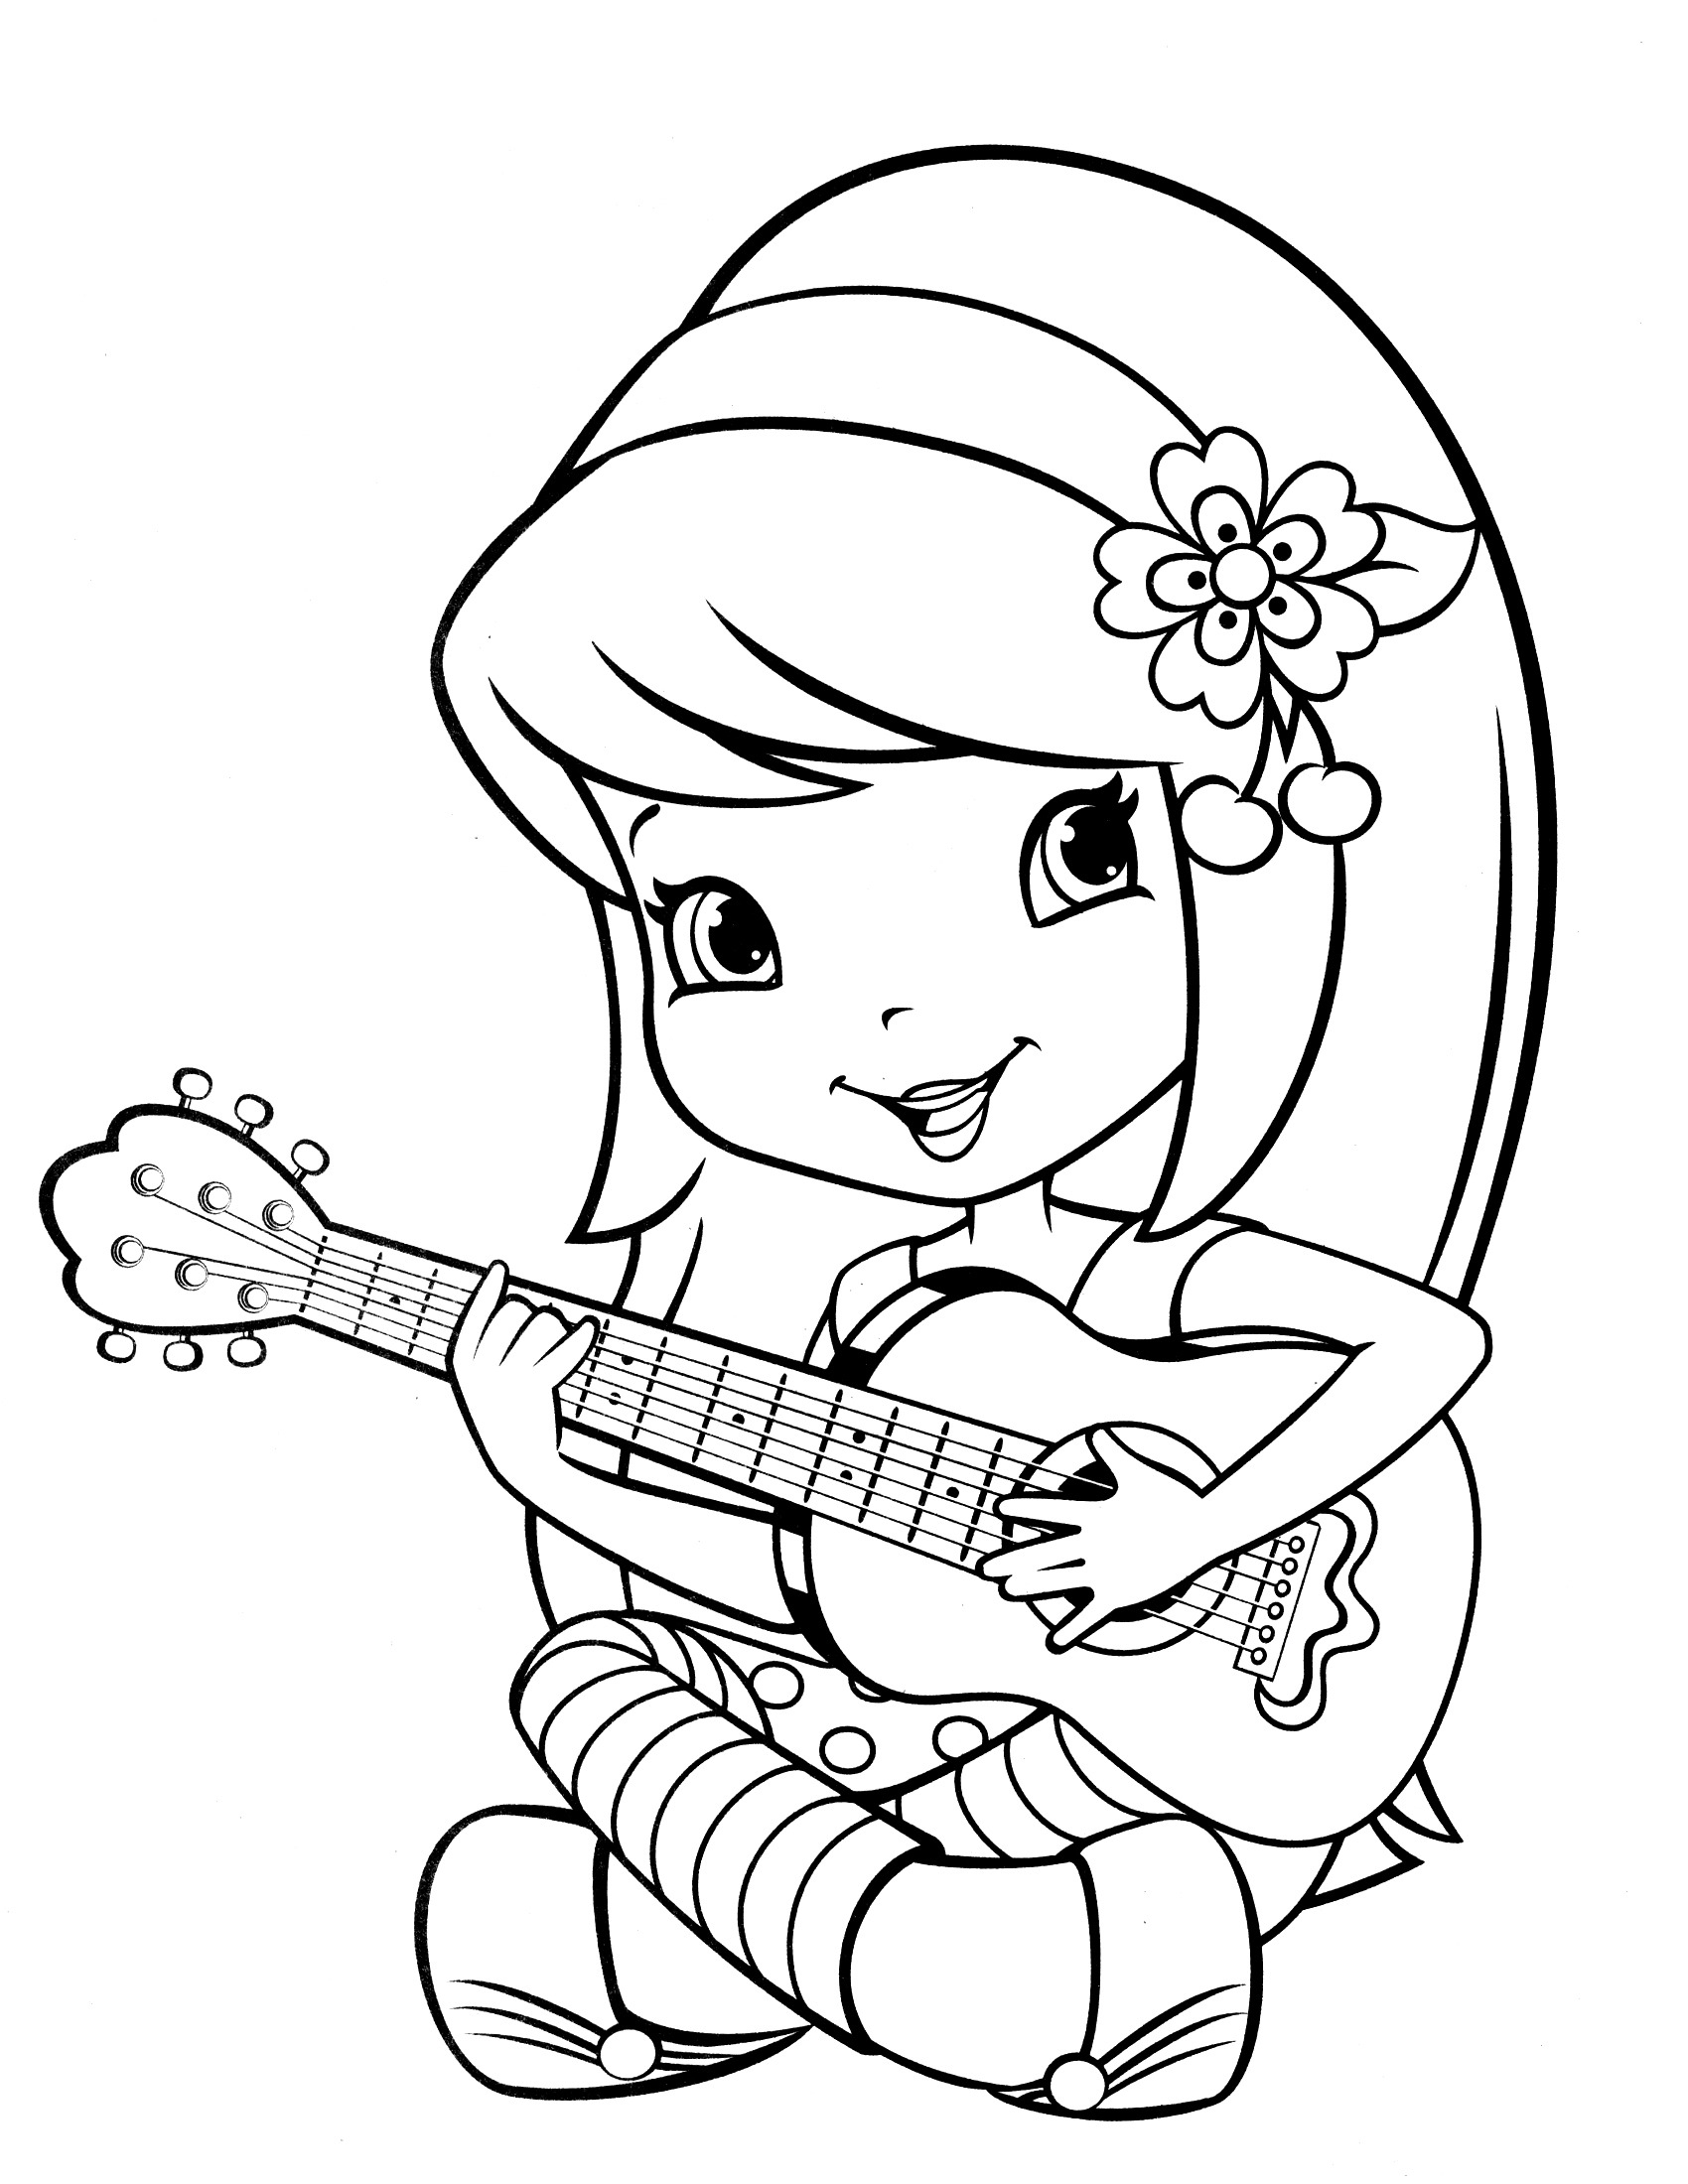 Strawberry Shortcake Coloring Pages Free Printable 5 #25833 - Strawberry Shortcake Coloring Pages Free Printable